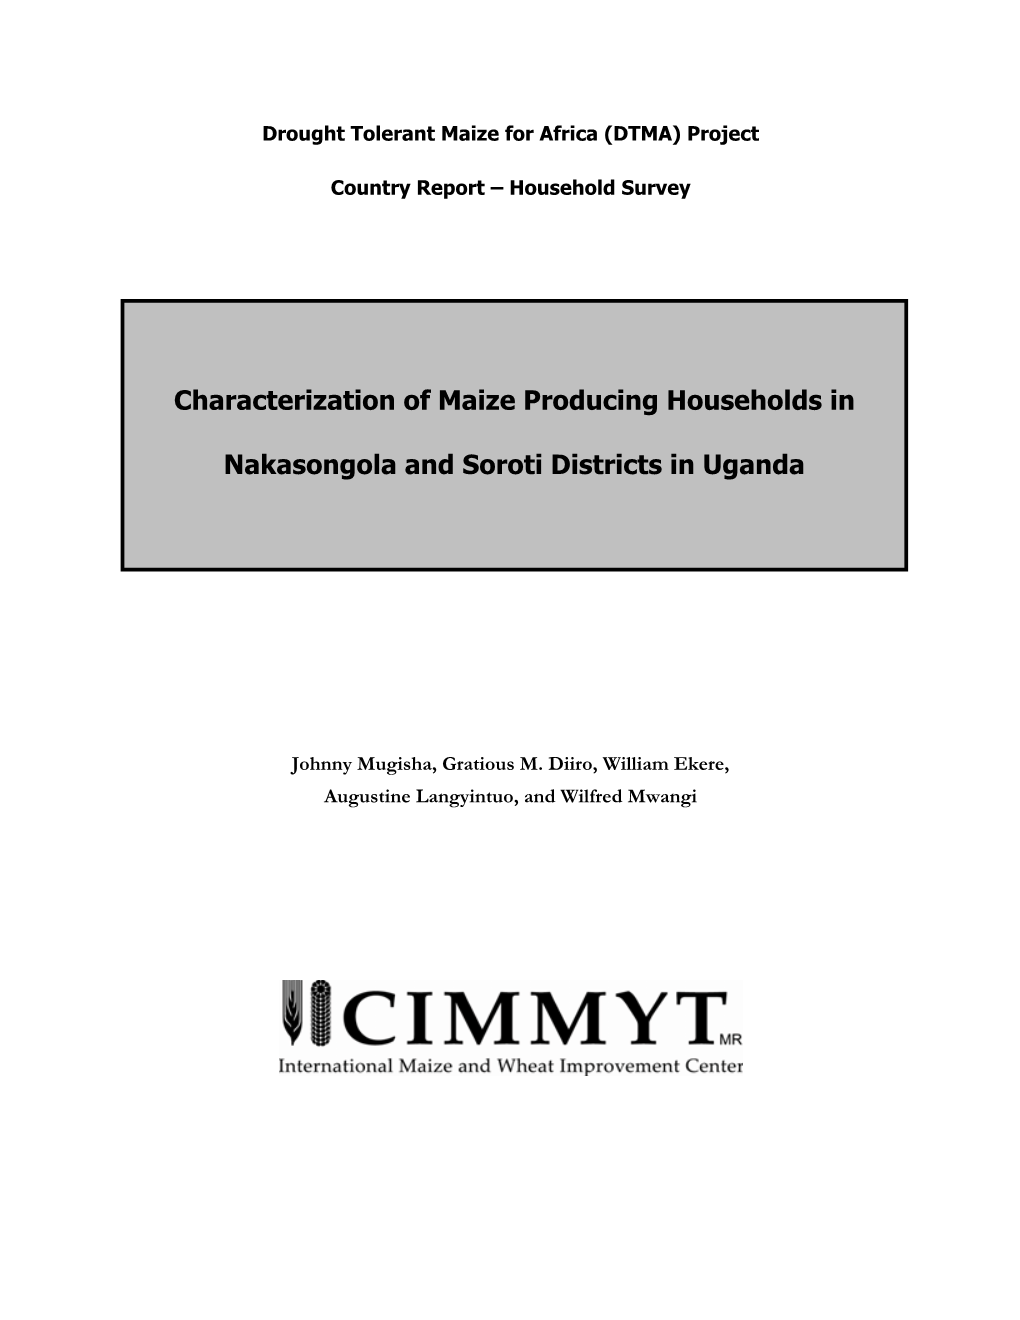 Characterization of Maize Producing Households in Nakasongola and Soroti Districts in Uganda